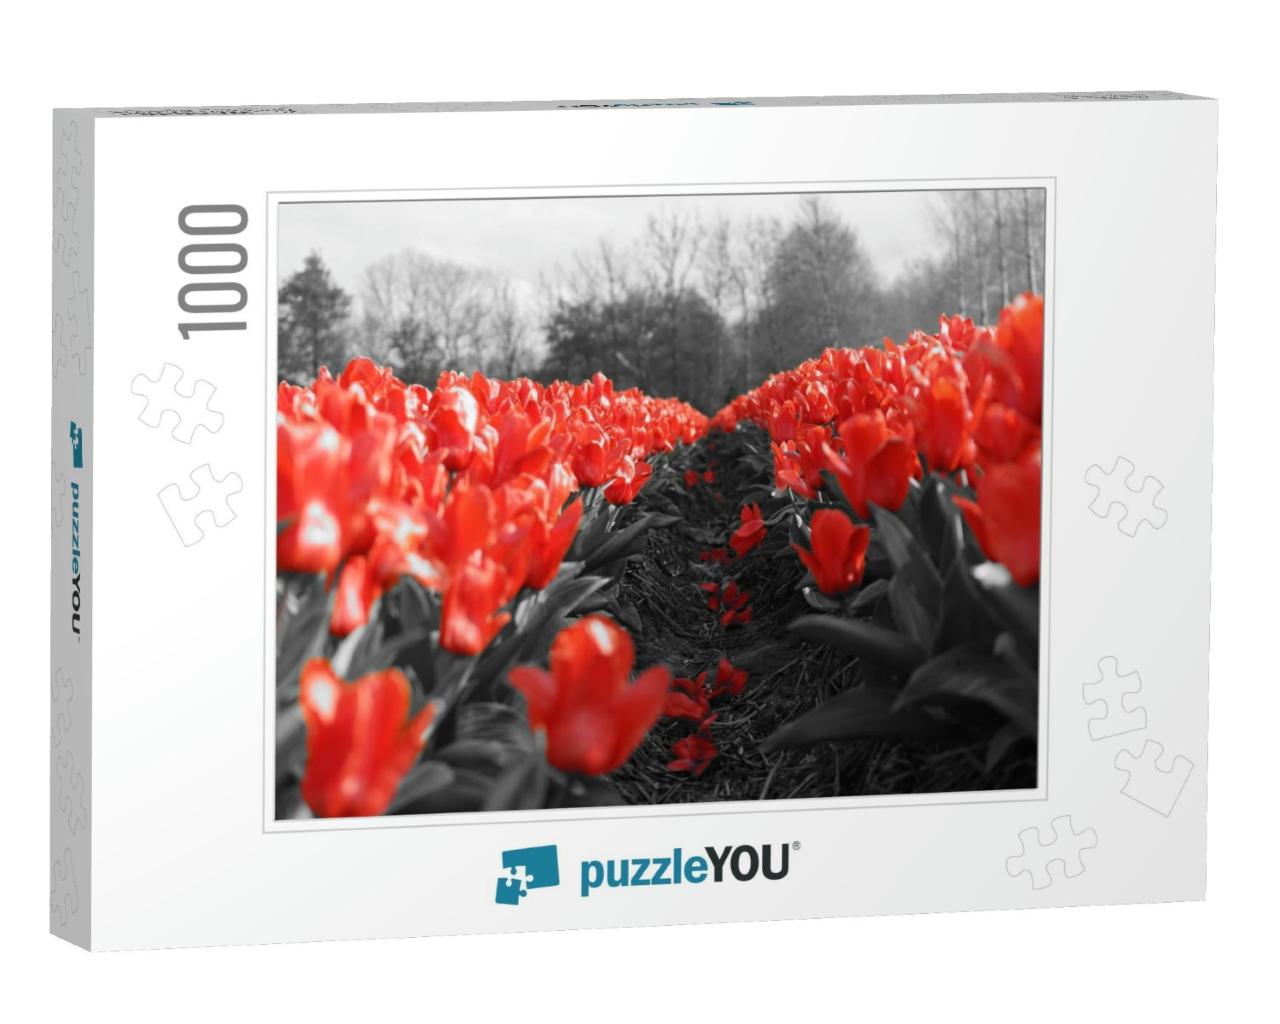 Black & White with Red Tulips Tulips in Holland Tulips Fi... Jigsaw Puzzle with 1000 pieces